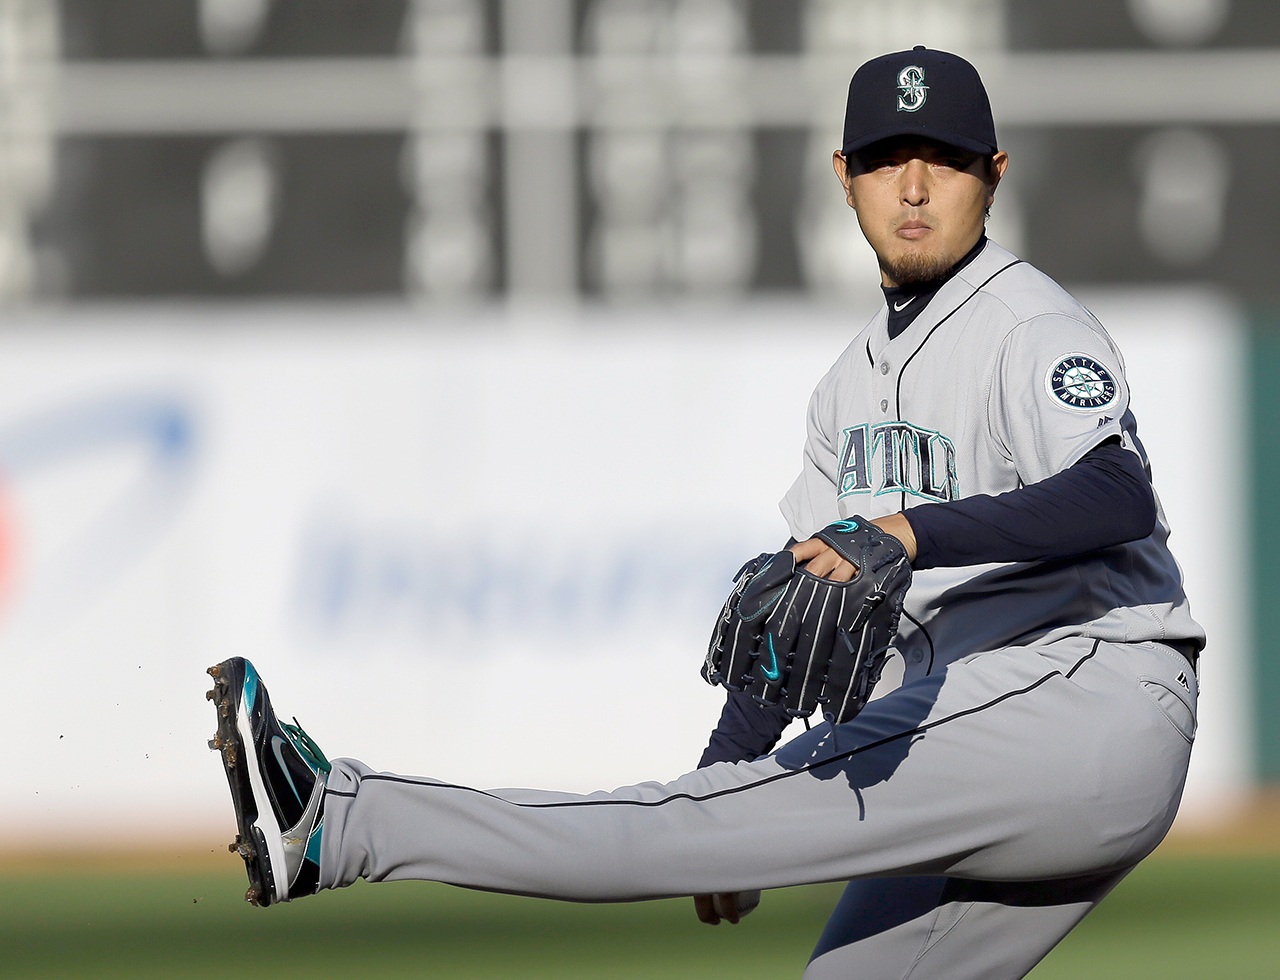 Seattle Mariners pitcher Hisashi Iwakuma works against the Oakland Athletics in the first inning of a baseball game Saturday, Aug. 13, 2016, in Oakland, Calif. (AP Photo/Ben Margot)